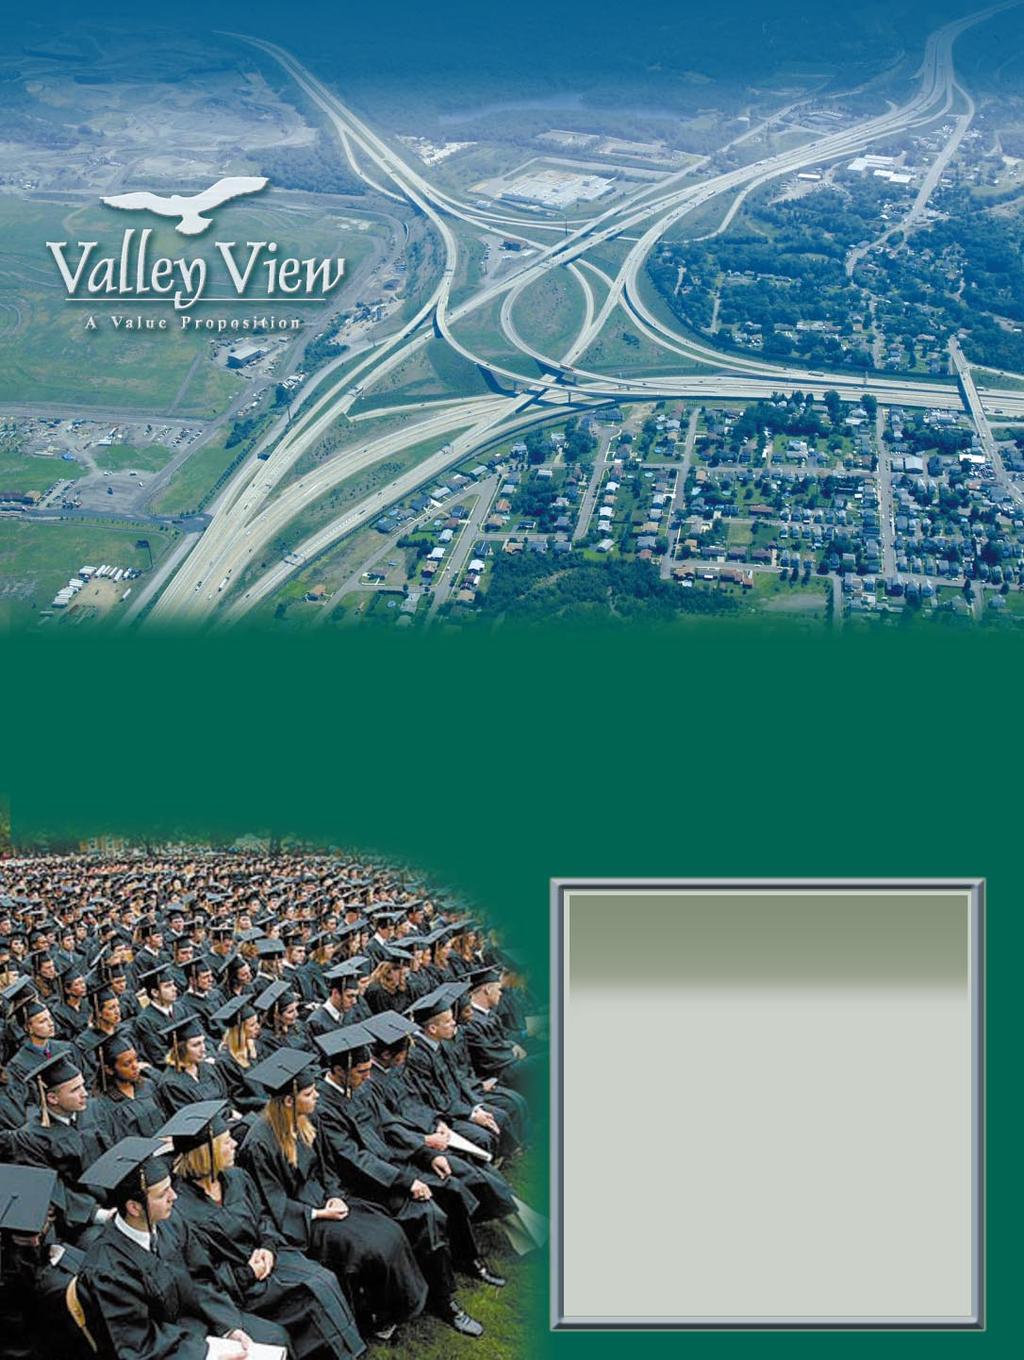 The communities surrounding Valley View Business Park offer a multitude of amenities.